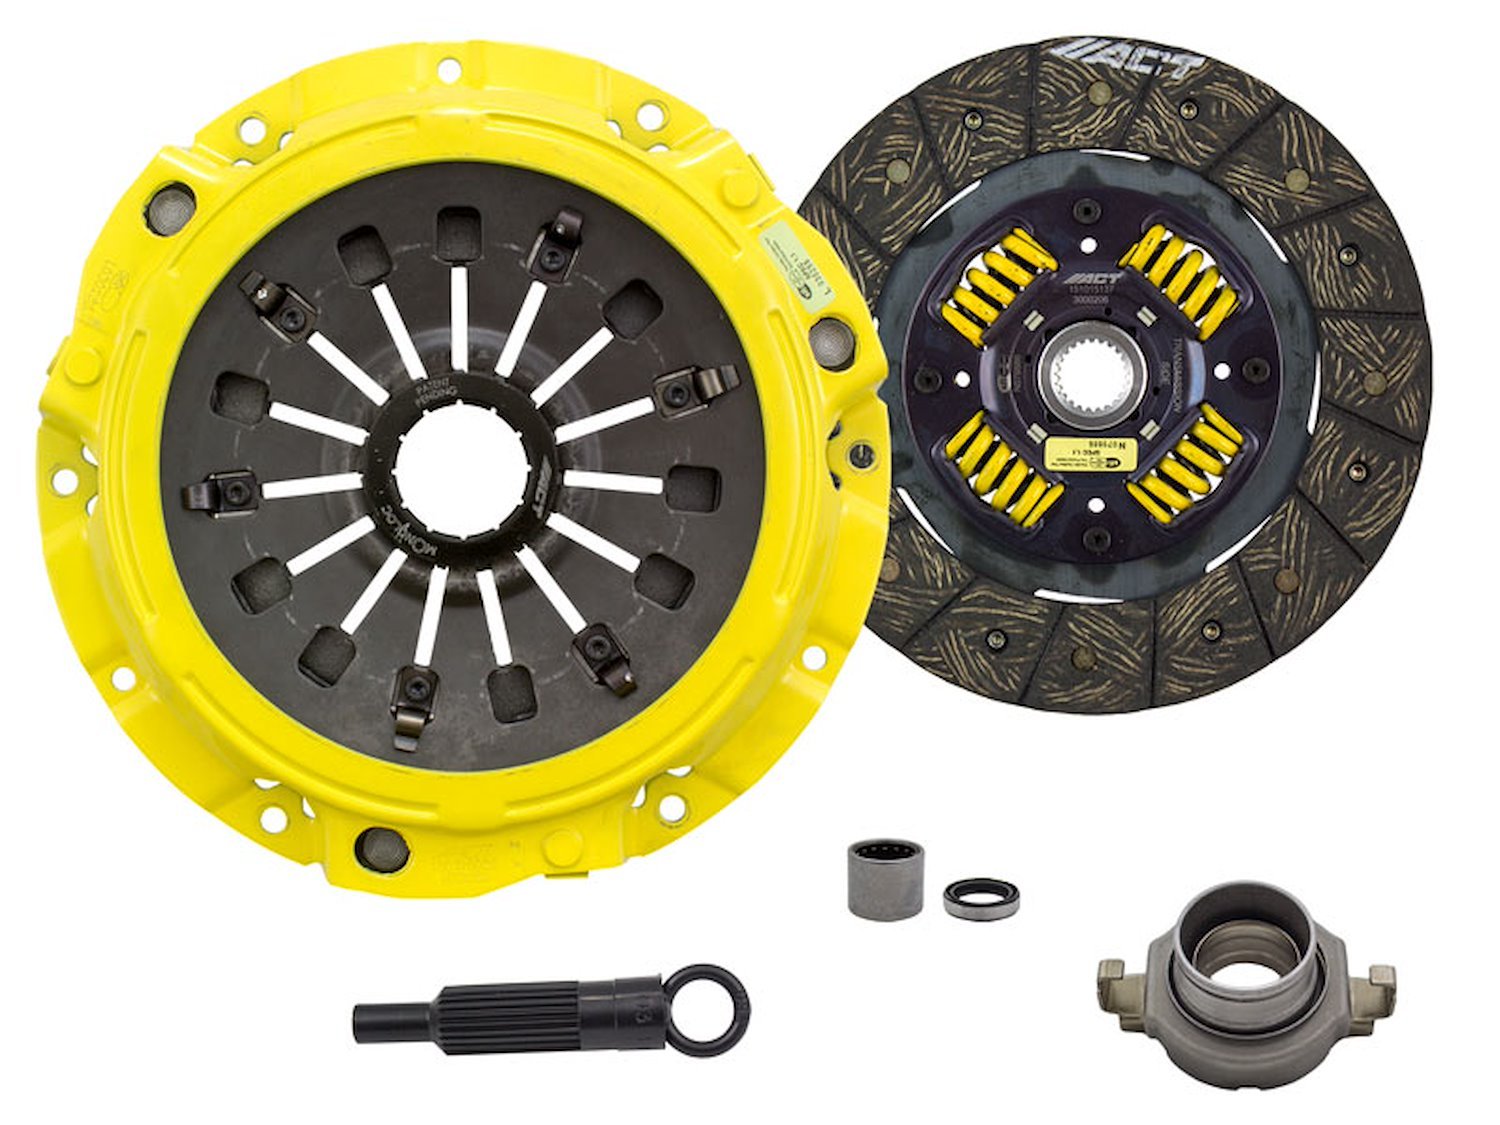 XT-M/Performance Street Sprung Transmission Clutch Kit Fits Select Ford/Lincoln/Mercury/Mazda